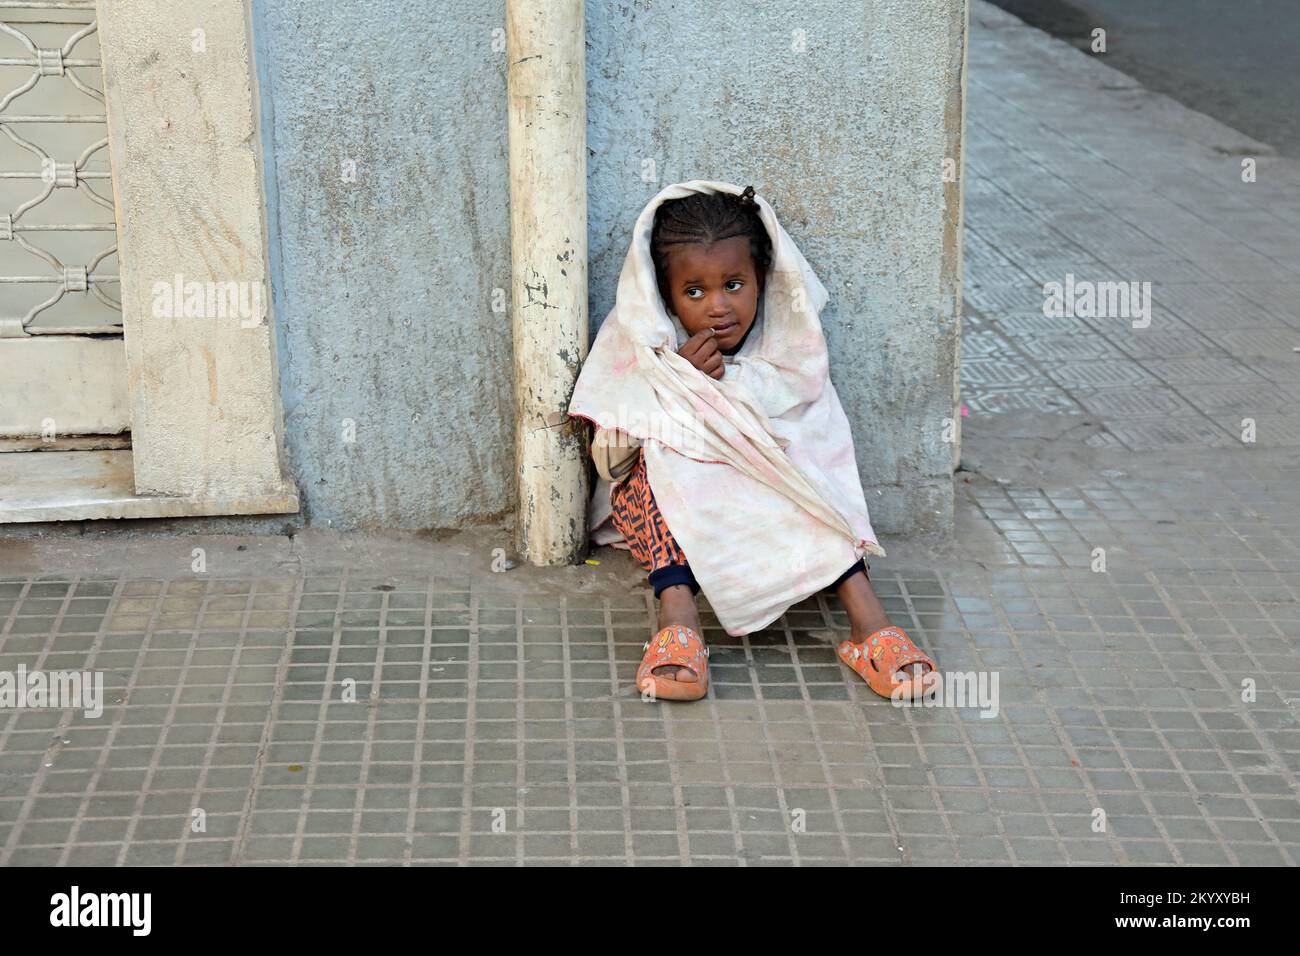 Young child alone on the street asking for food in Eritrea Stock Photo